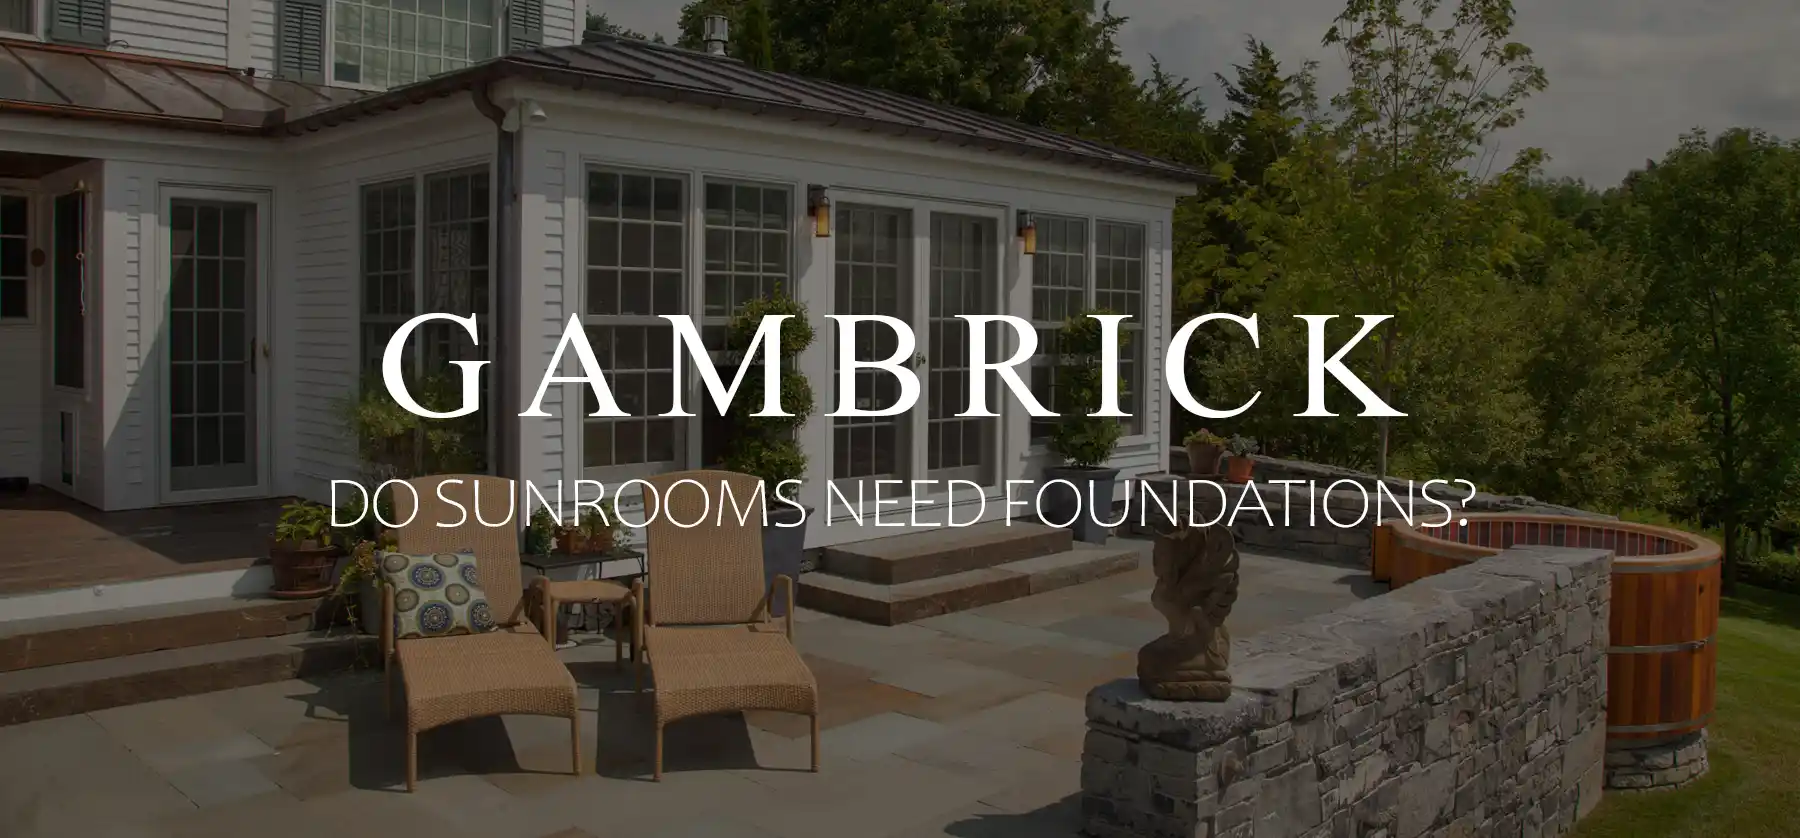 do sunrooms need foundations banner 1.0